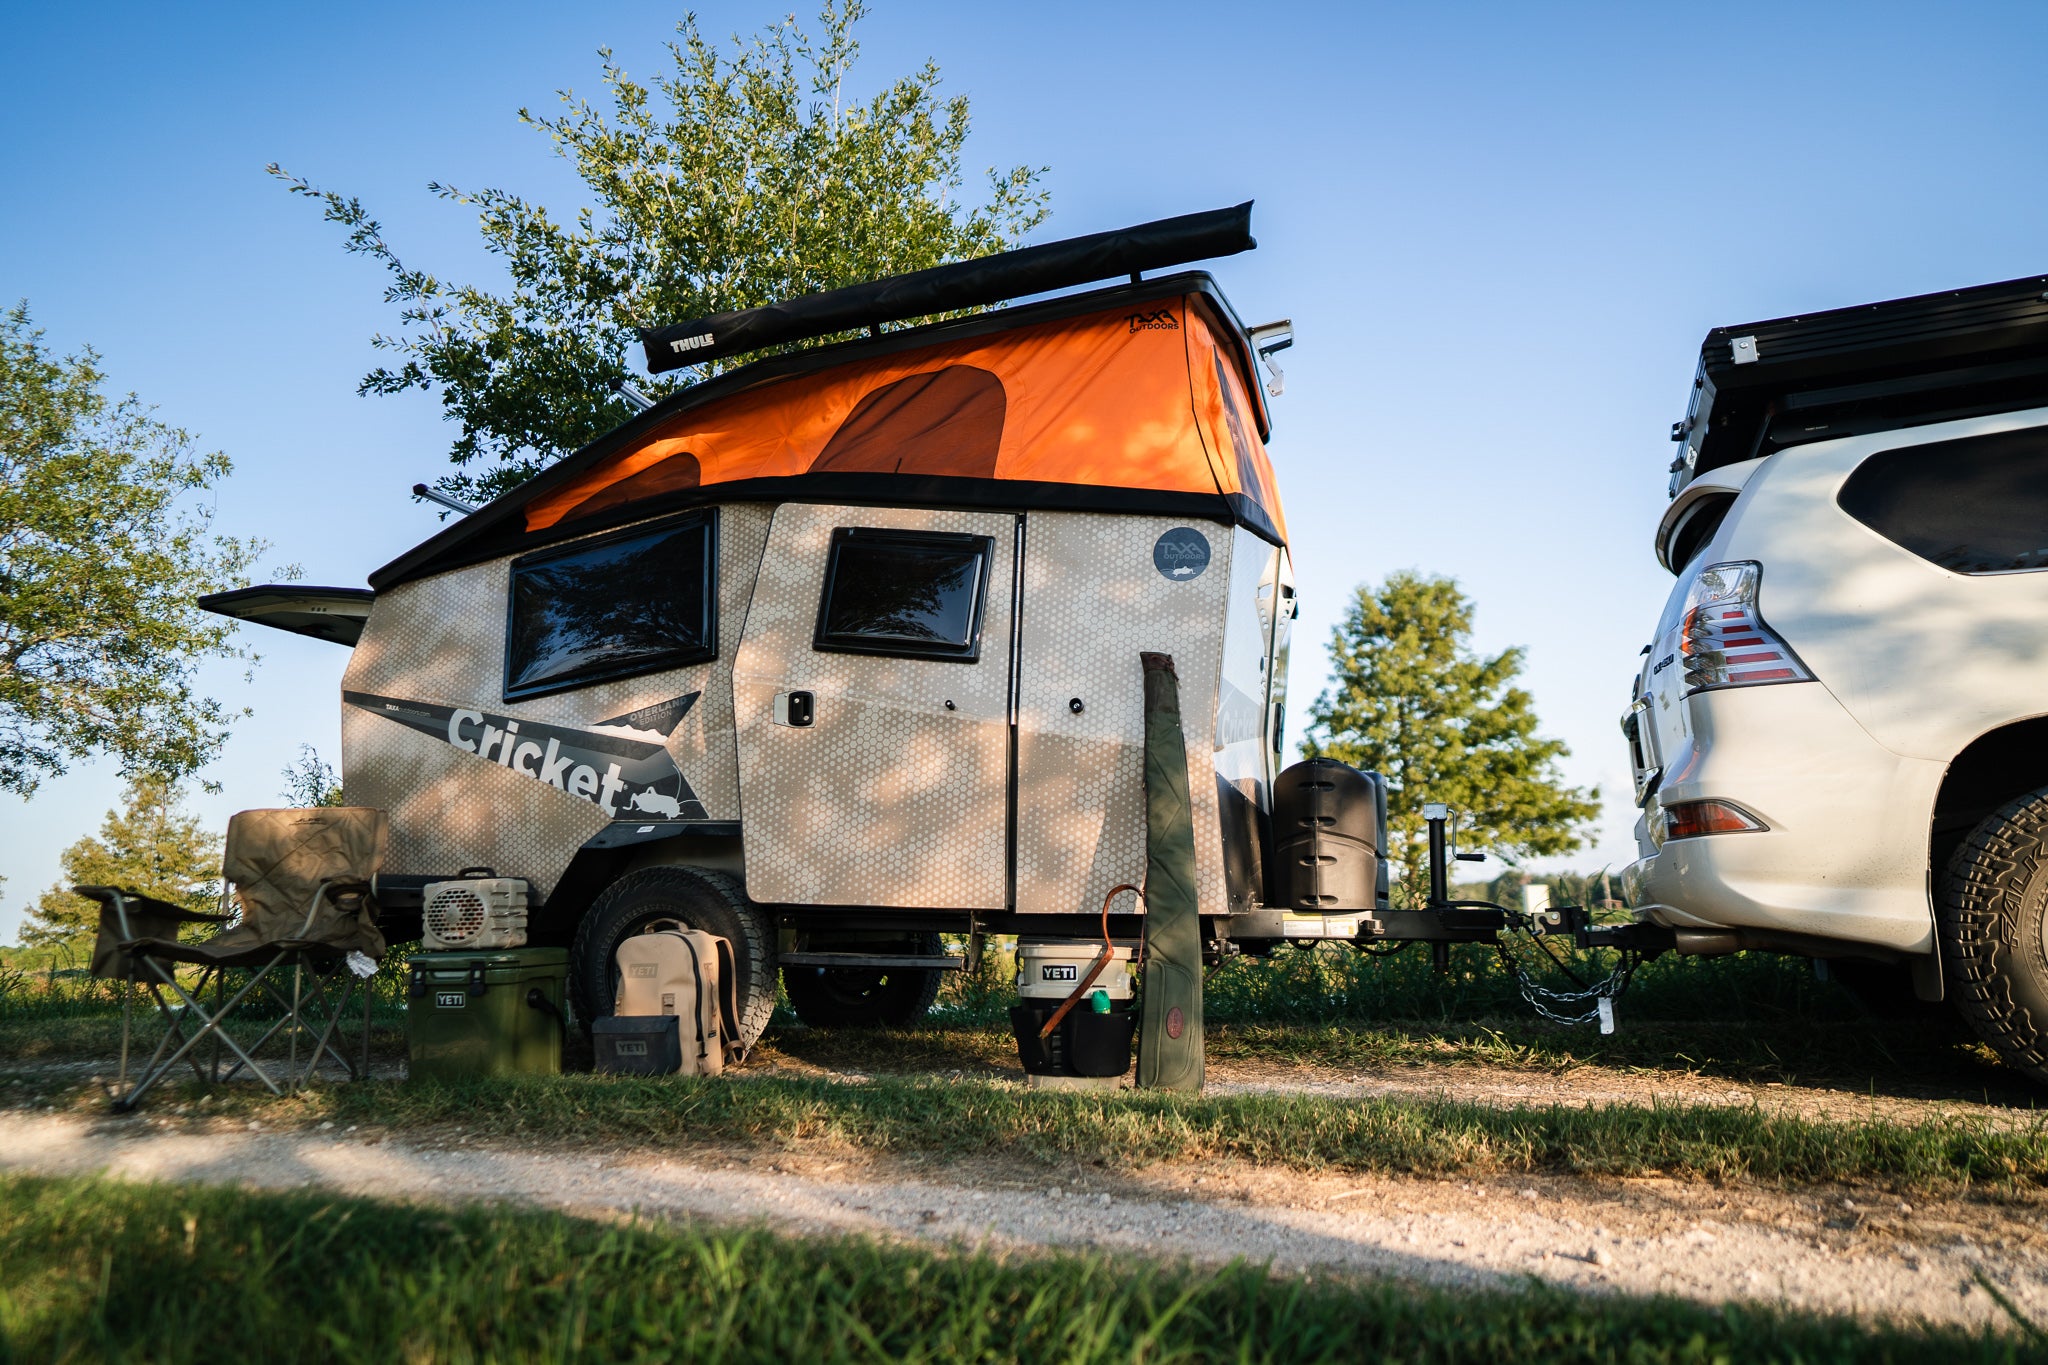 Buy RV & Outdoor Products from On The Go - RV Part Shop